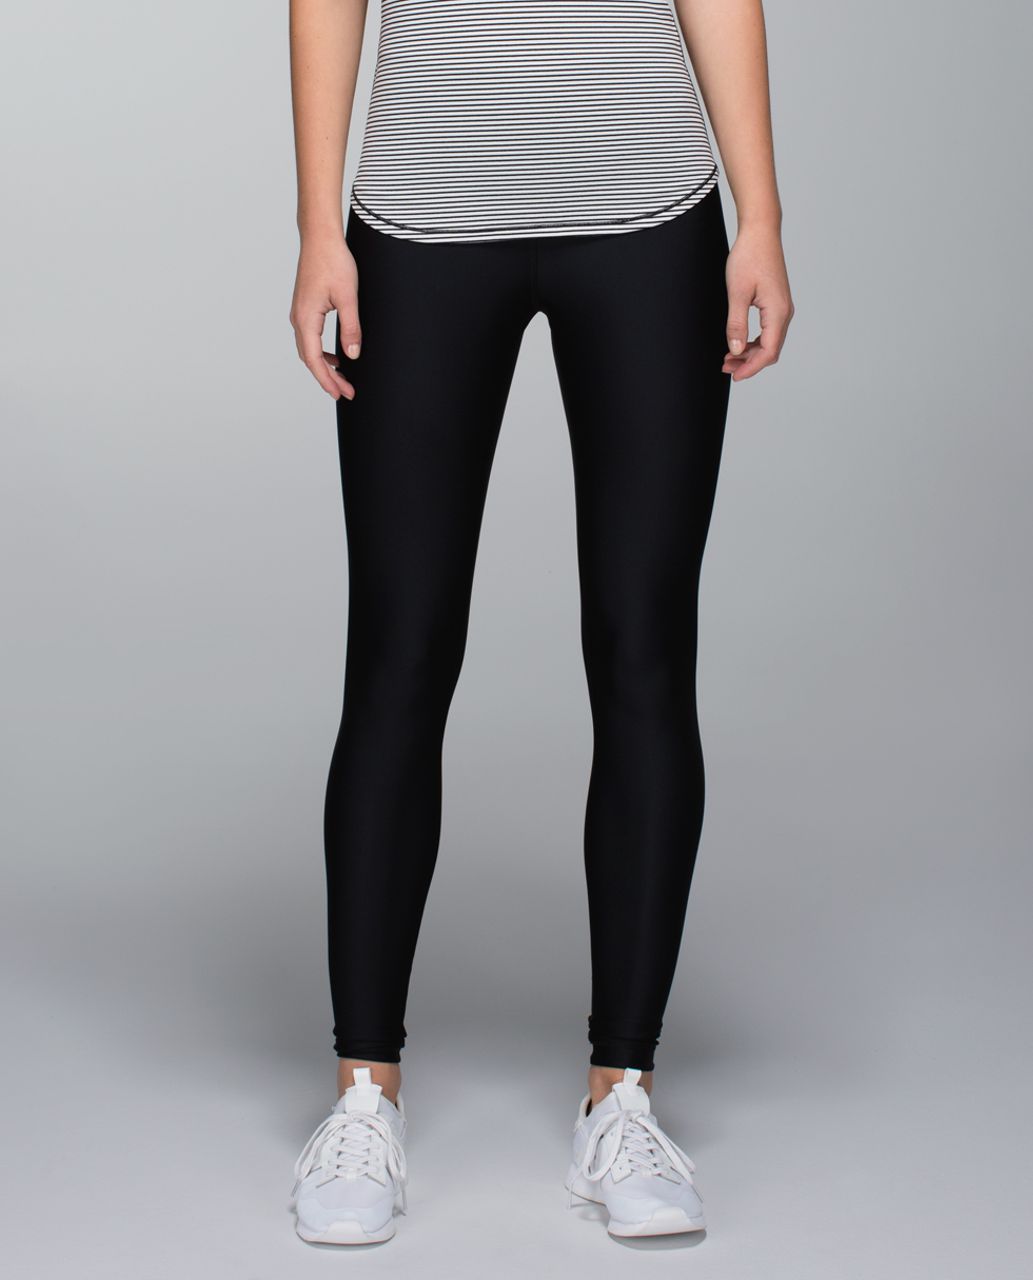 Are Leggings Good For Hot Weather Channel